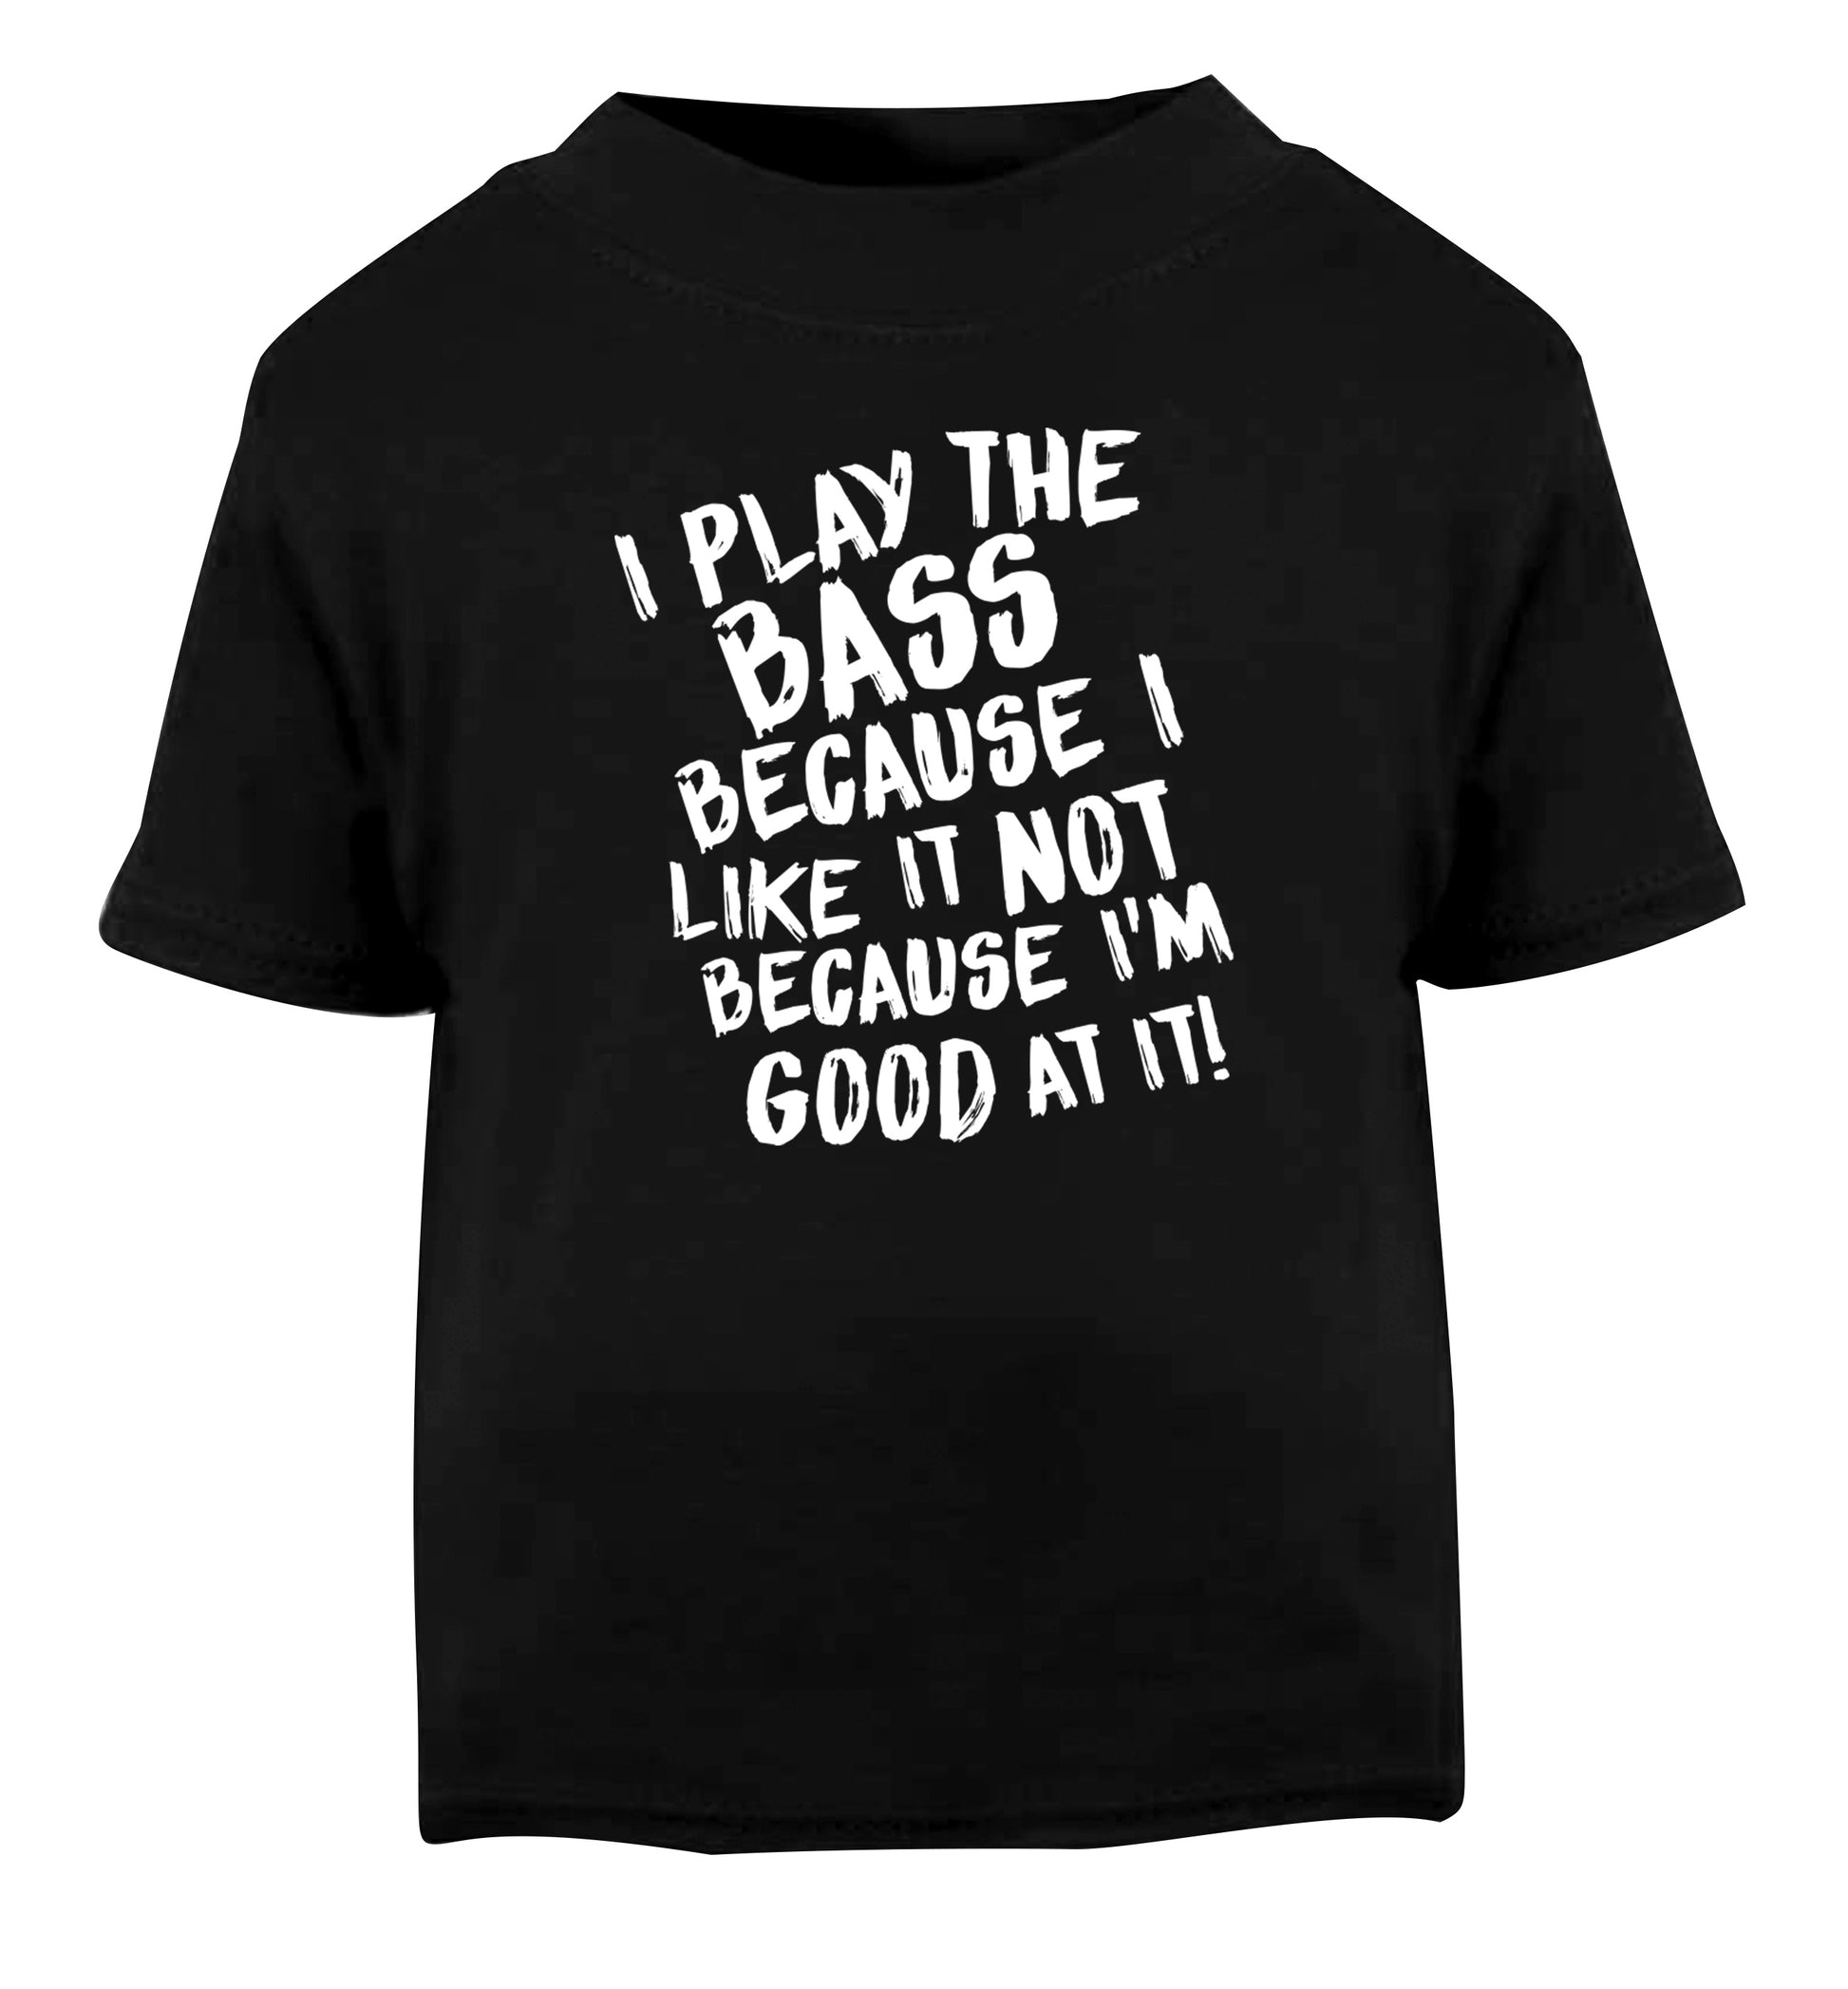 I play the bass because I like it not because I'm good at it Black Baby Toddler Tshirt 2 years